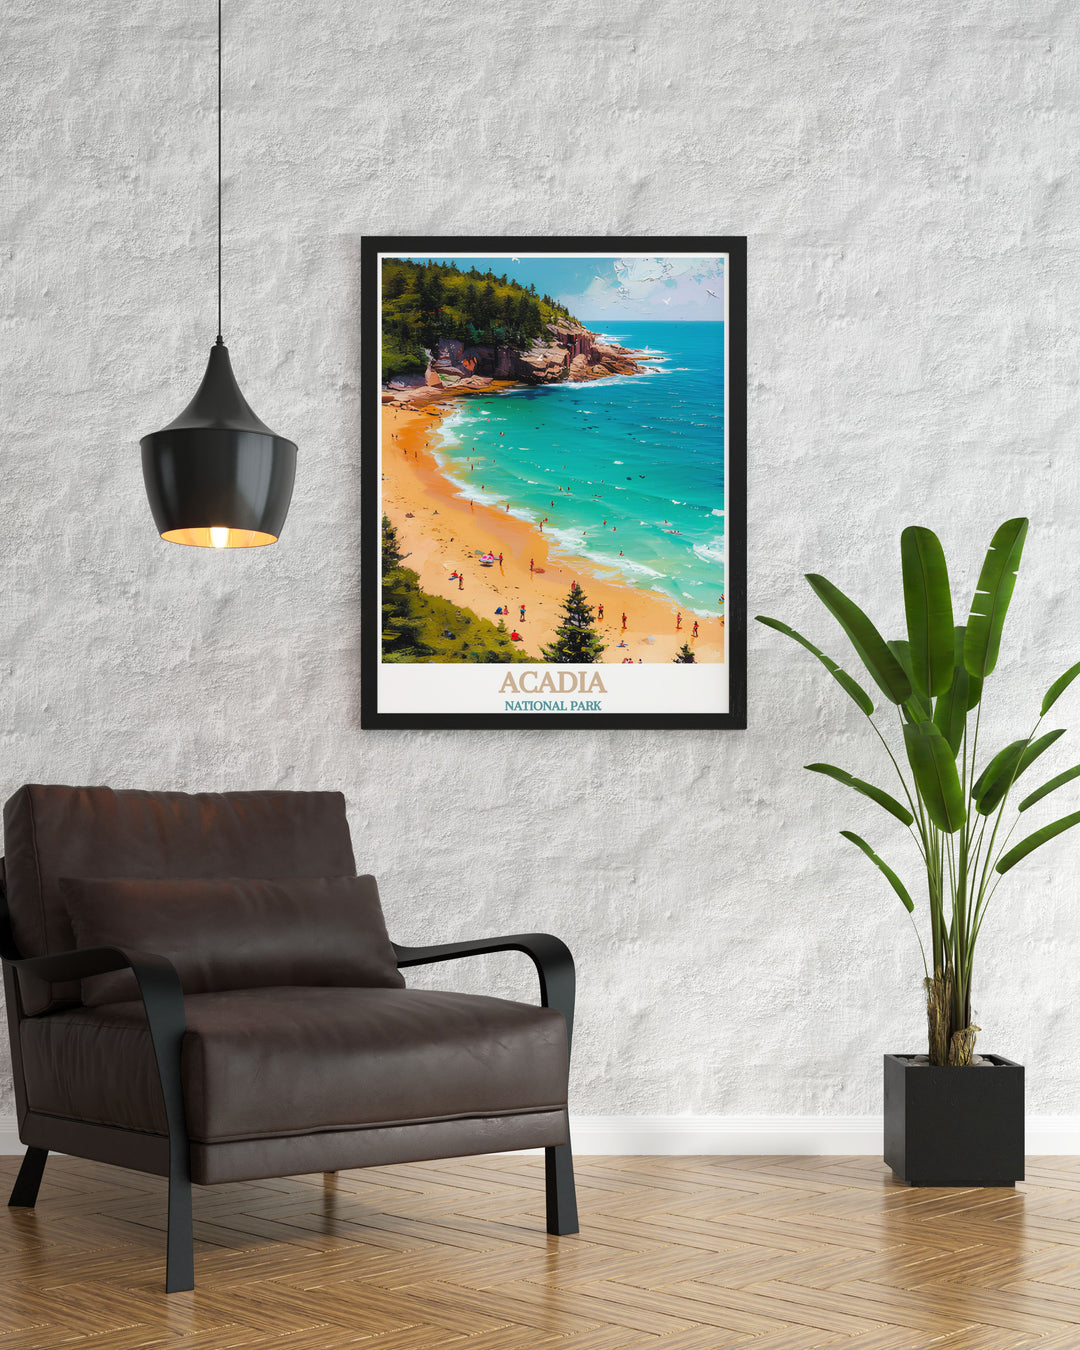 Beautifully detailed Sand Beach artwork from Acadia National Park ideal for adding a unique and elegant touch to your home or office decor perfect gift for nature lovers and fans of vintage travel posters.